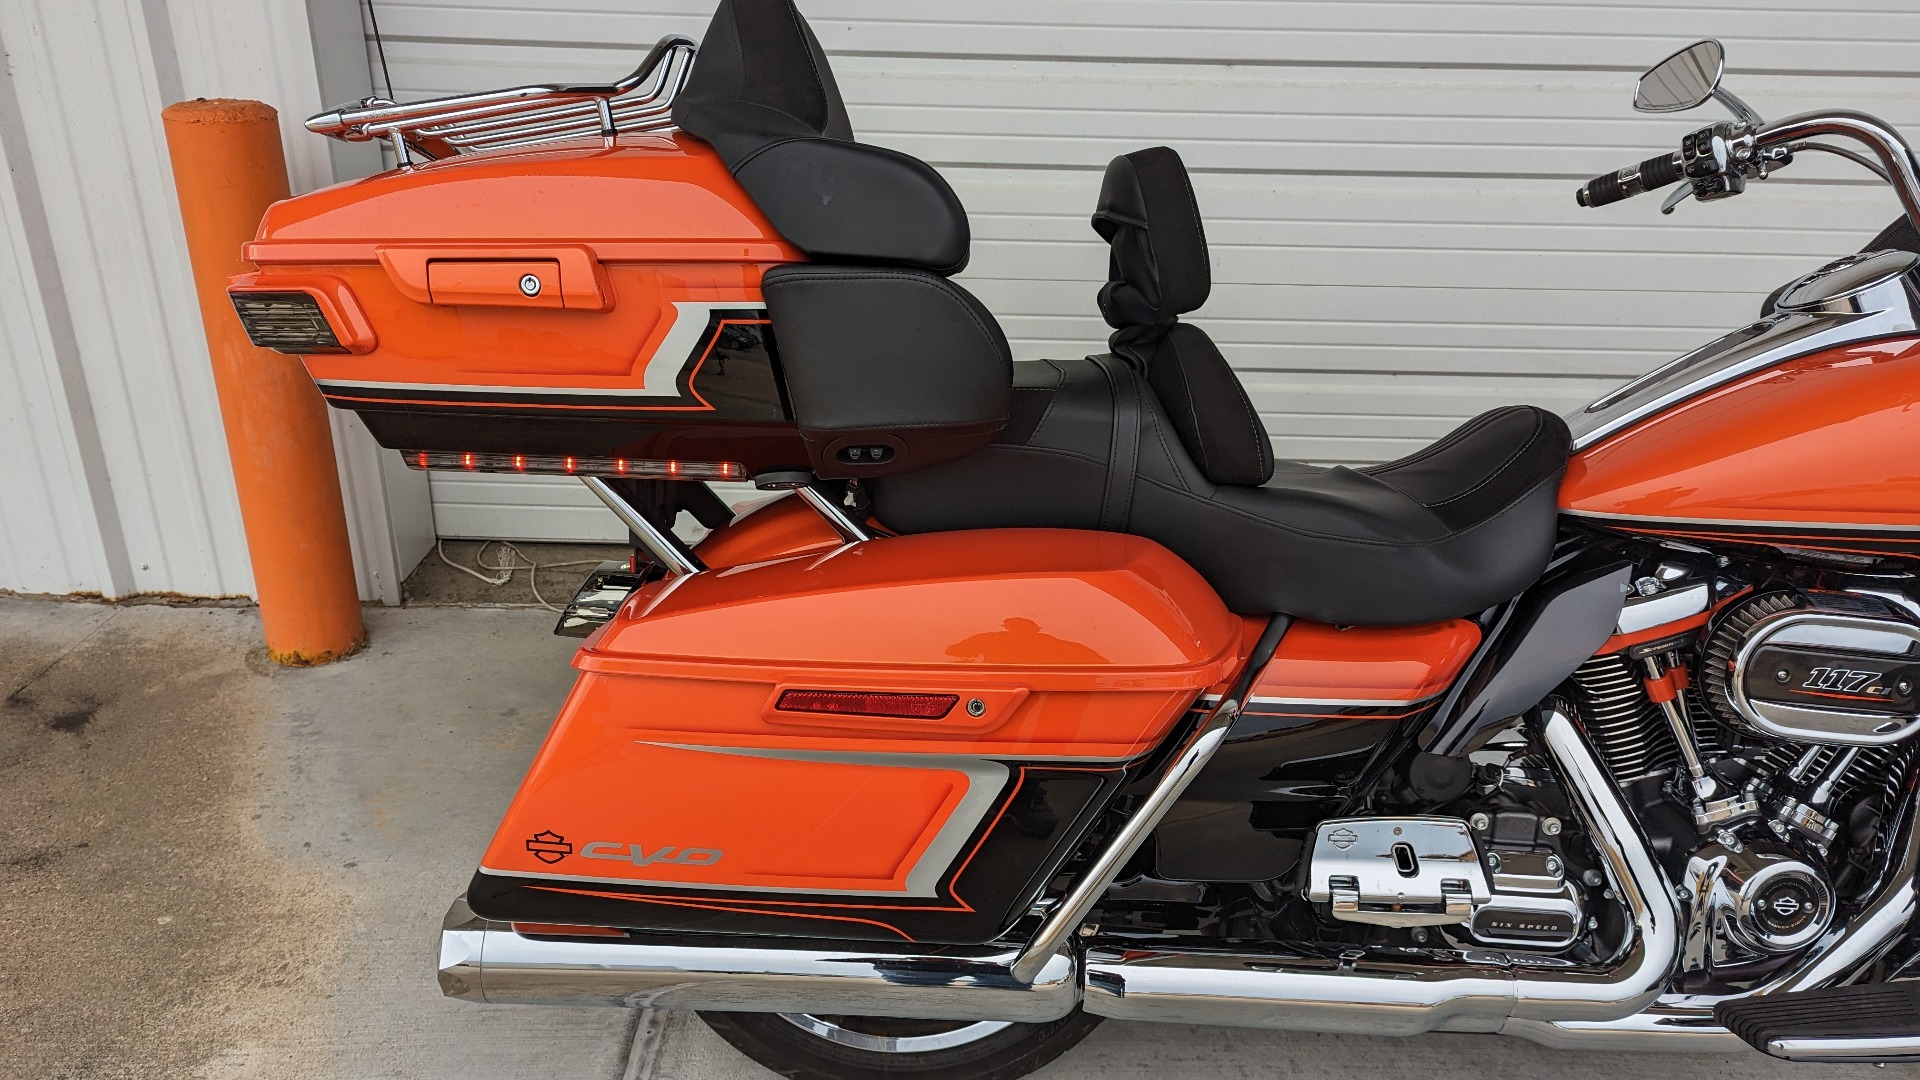 harley cvo road glides for sale in arkansas - Photo 5